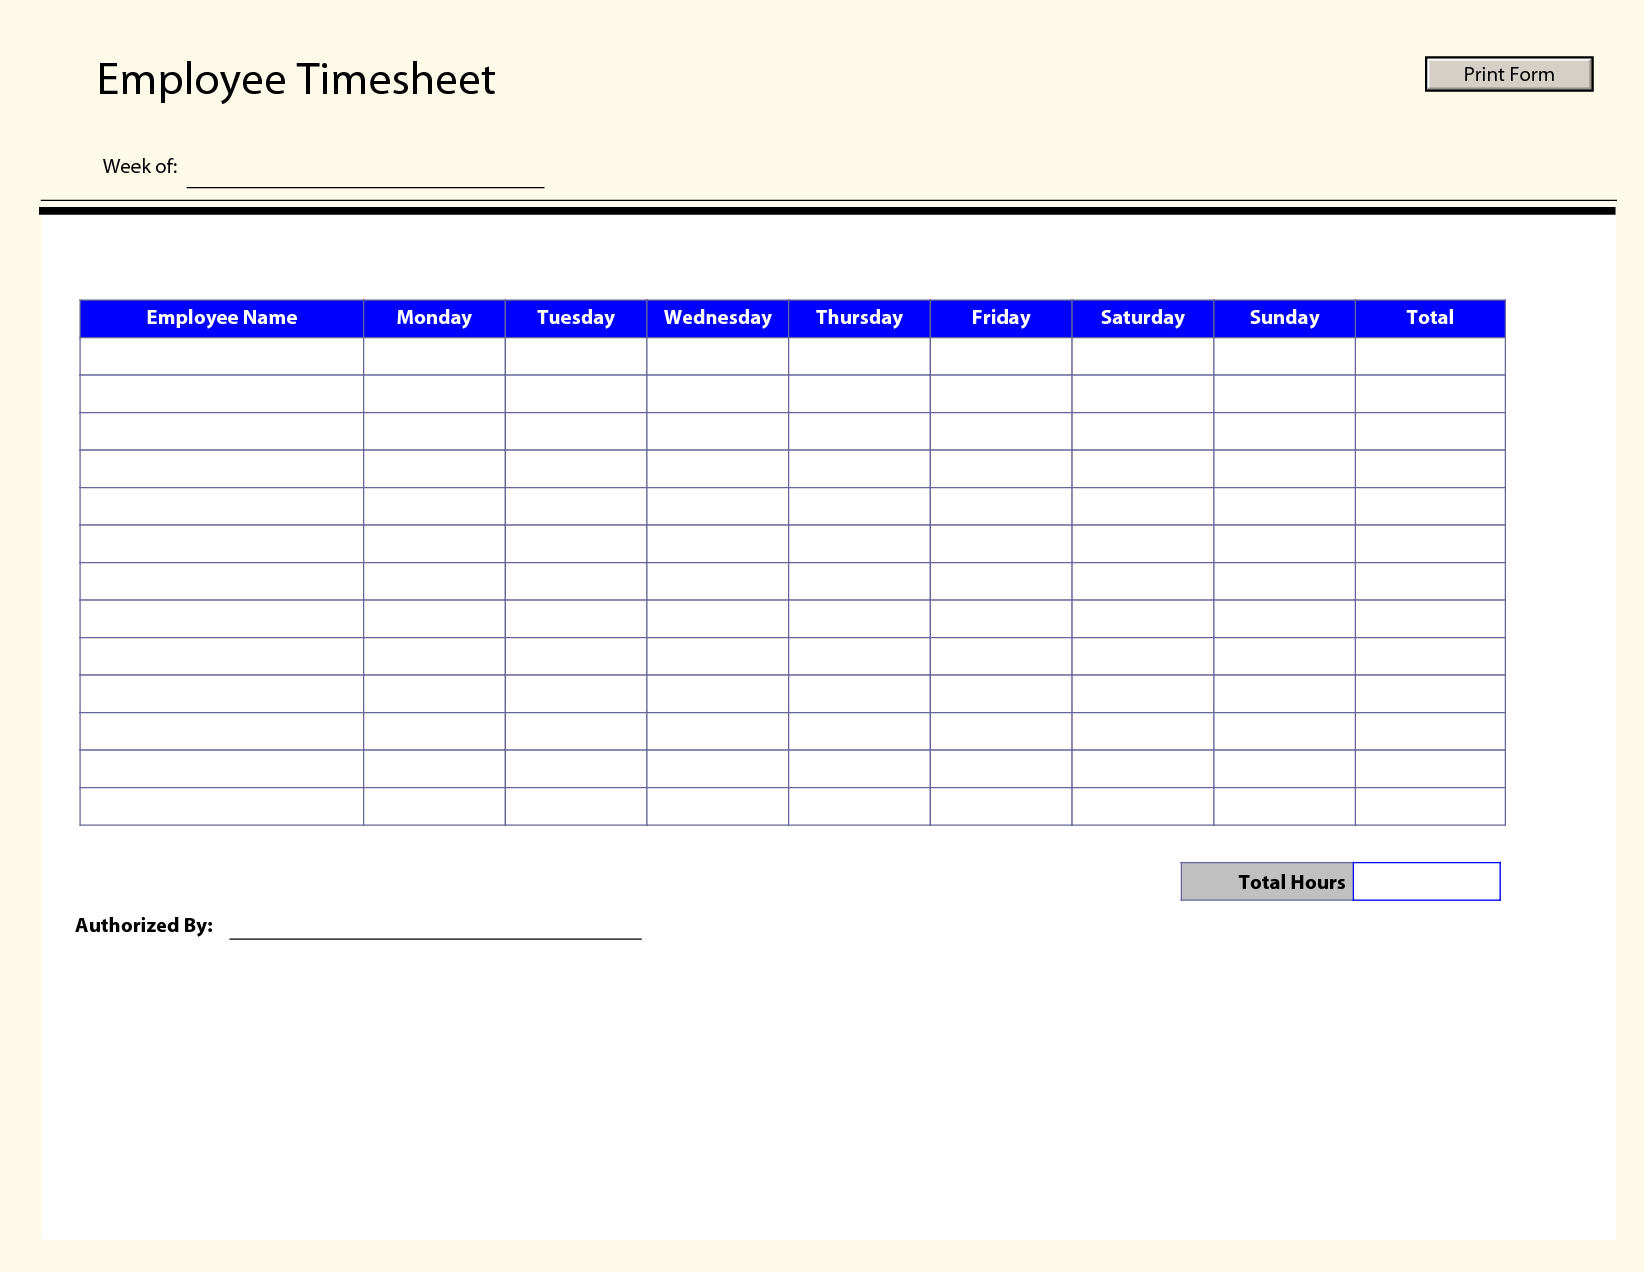 Blank Employee Timesheet Template | Management Templates | Pinterest - Free Printable Blank Time Sheets